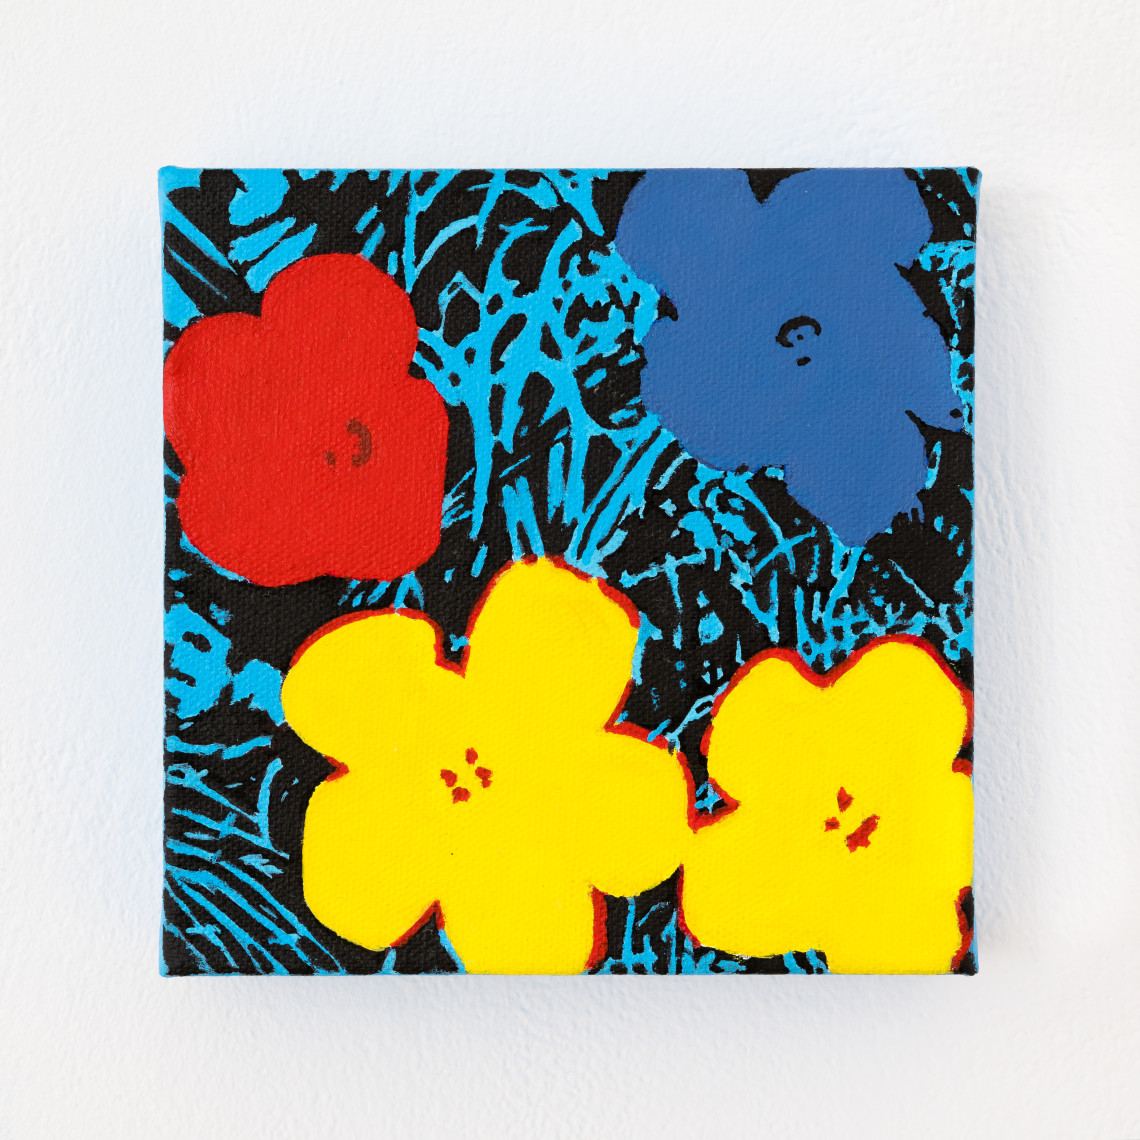  - Sunday B. Morning Andy Warhol (After) Flowers 11.71